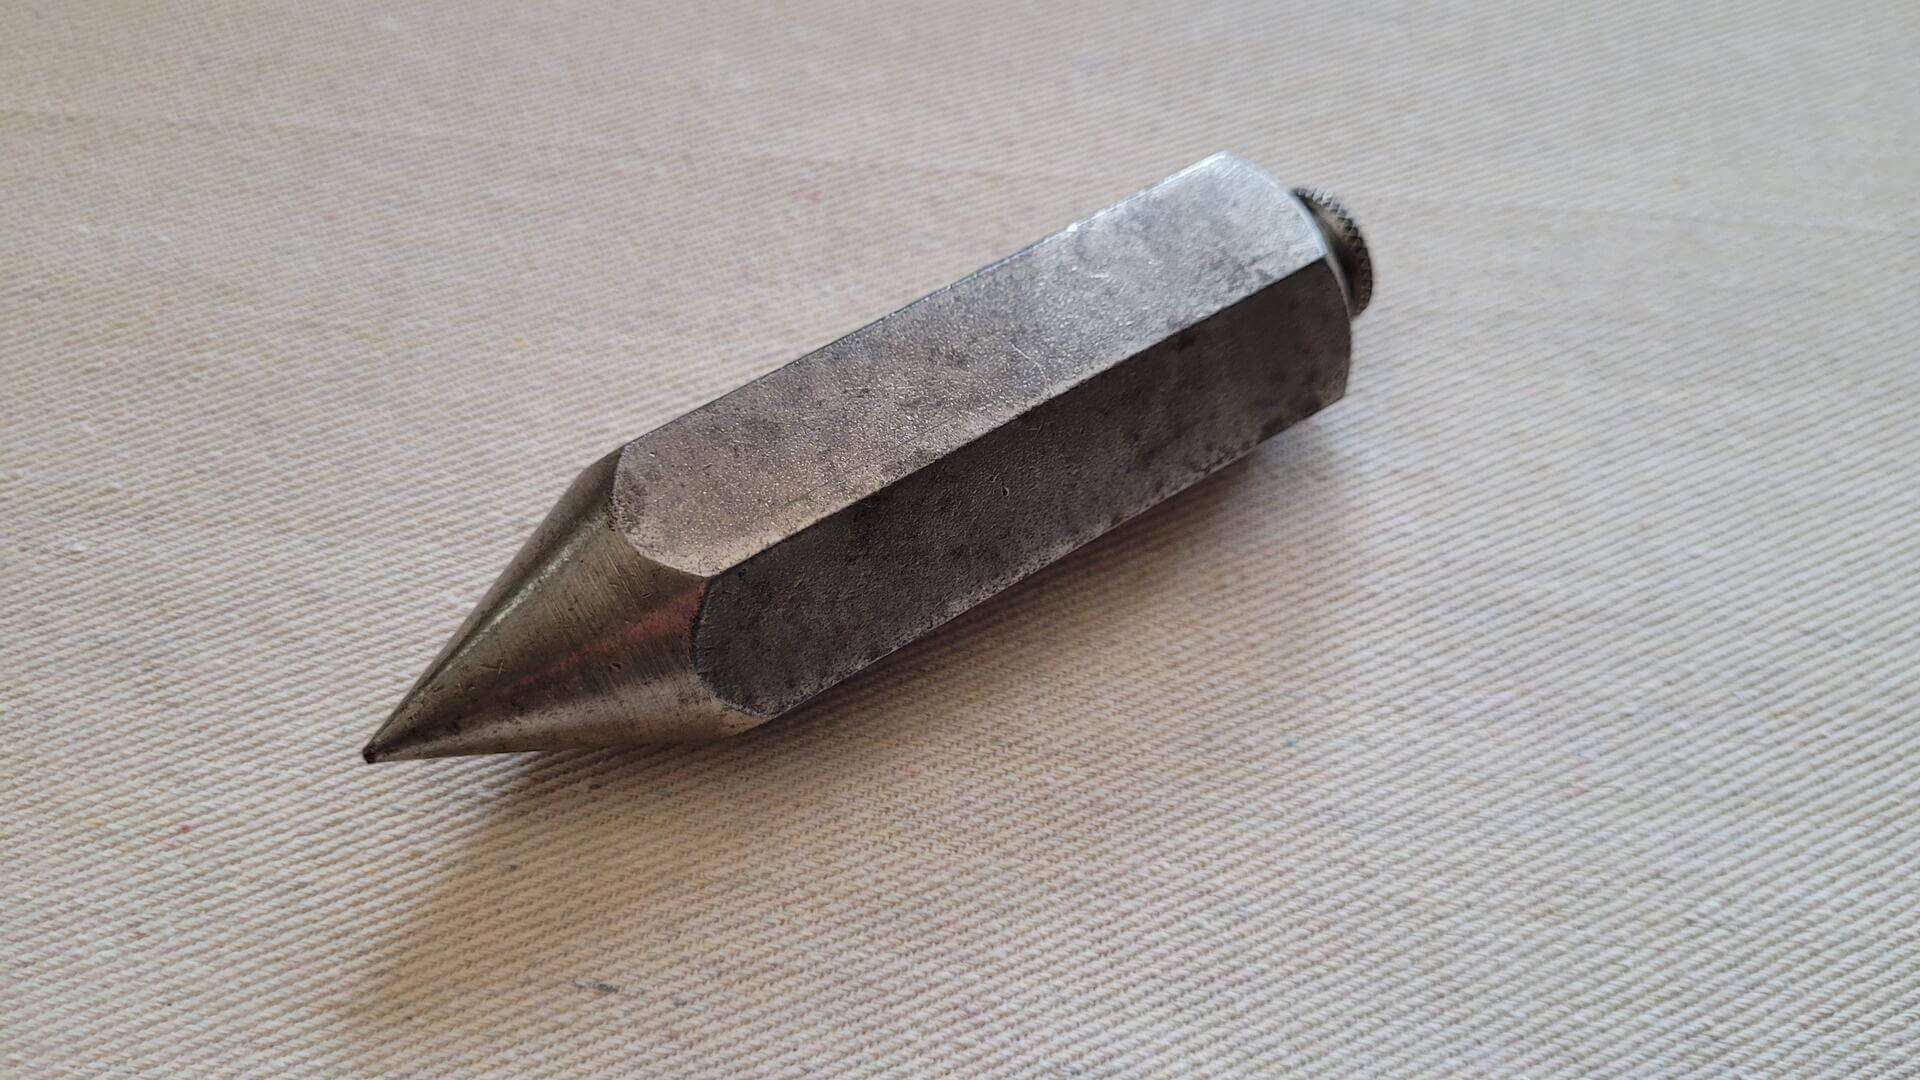 vintage hexagonal all steel pencil style surveying plumb bob 1 lb / 454g and 4 1/2" in length. Antique collectible marking and measuring tools